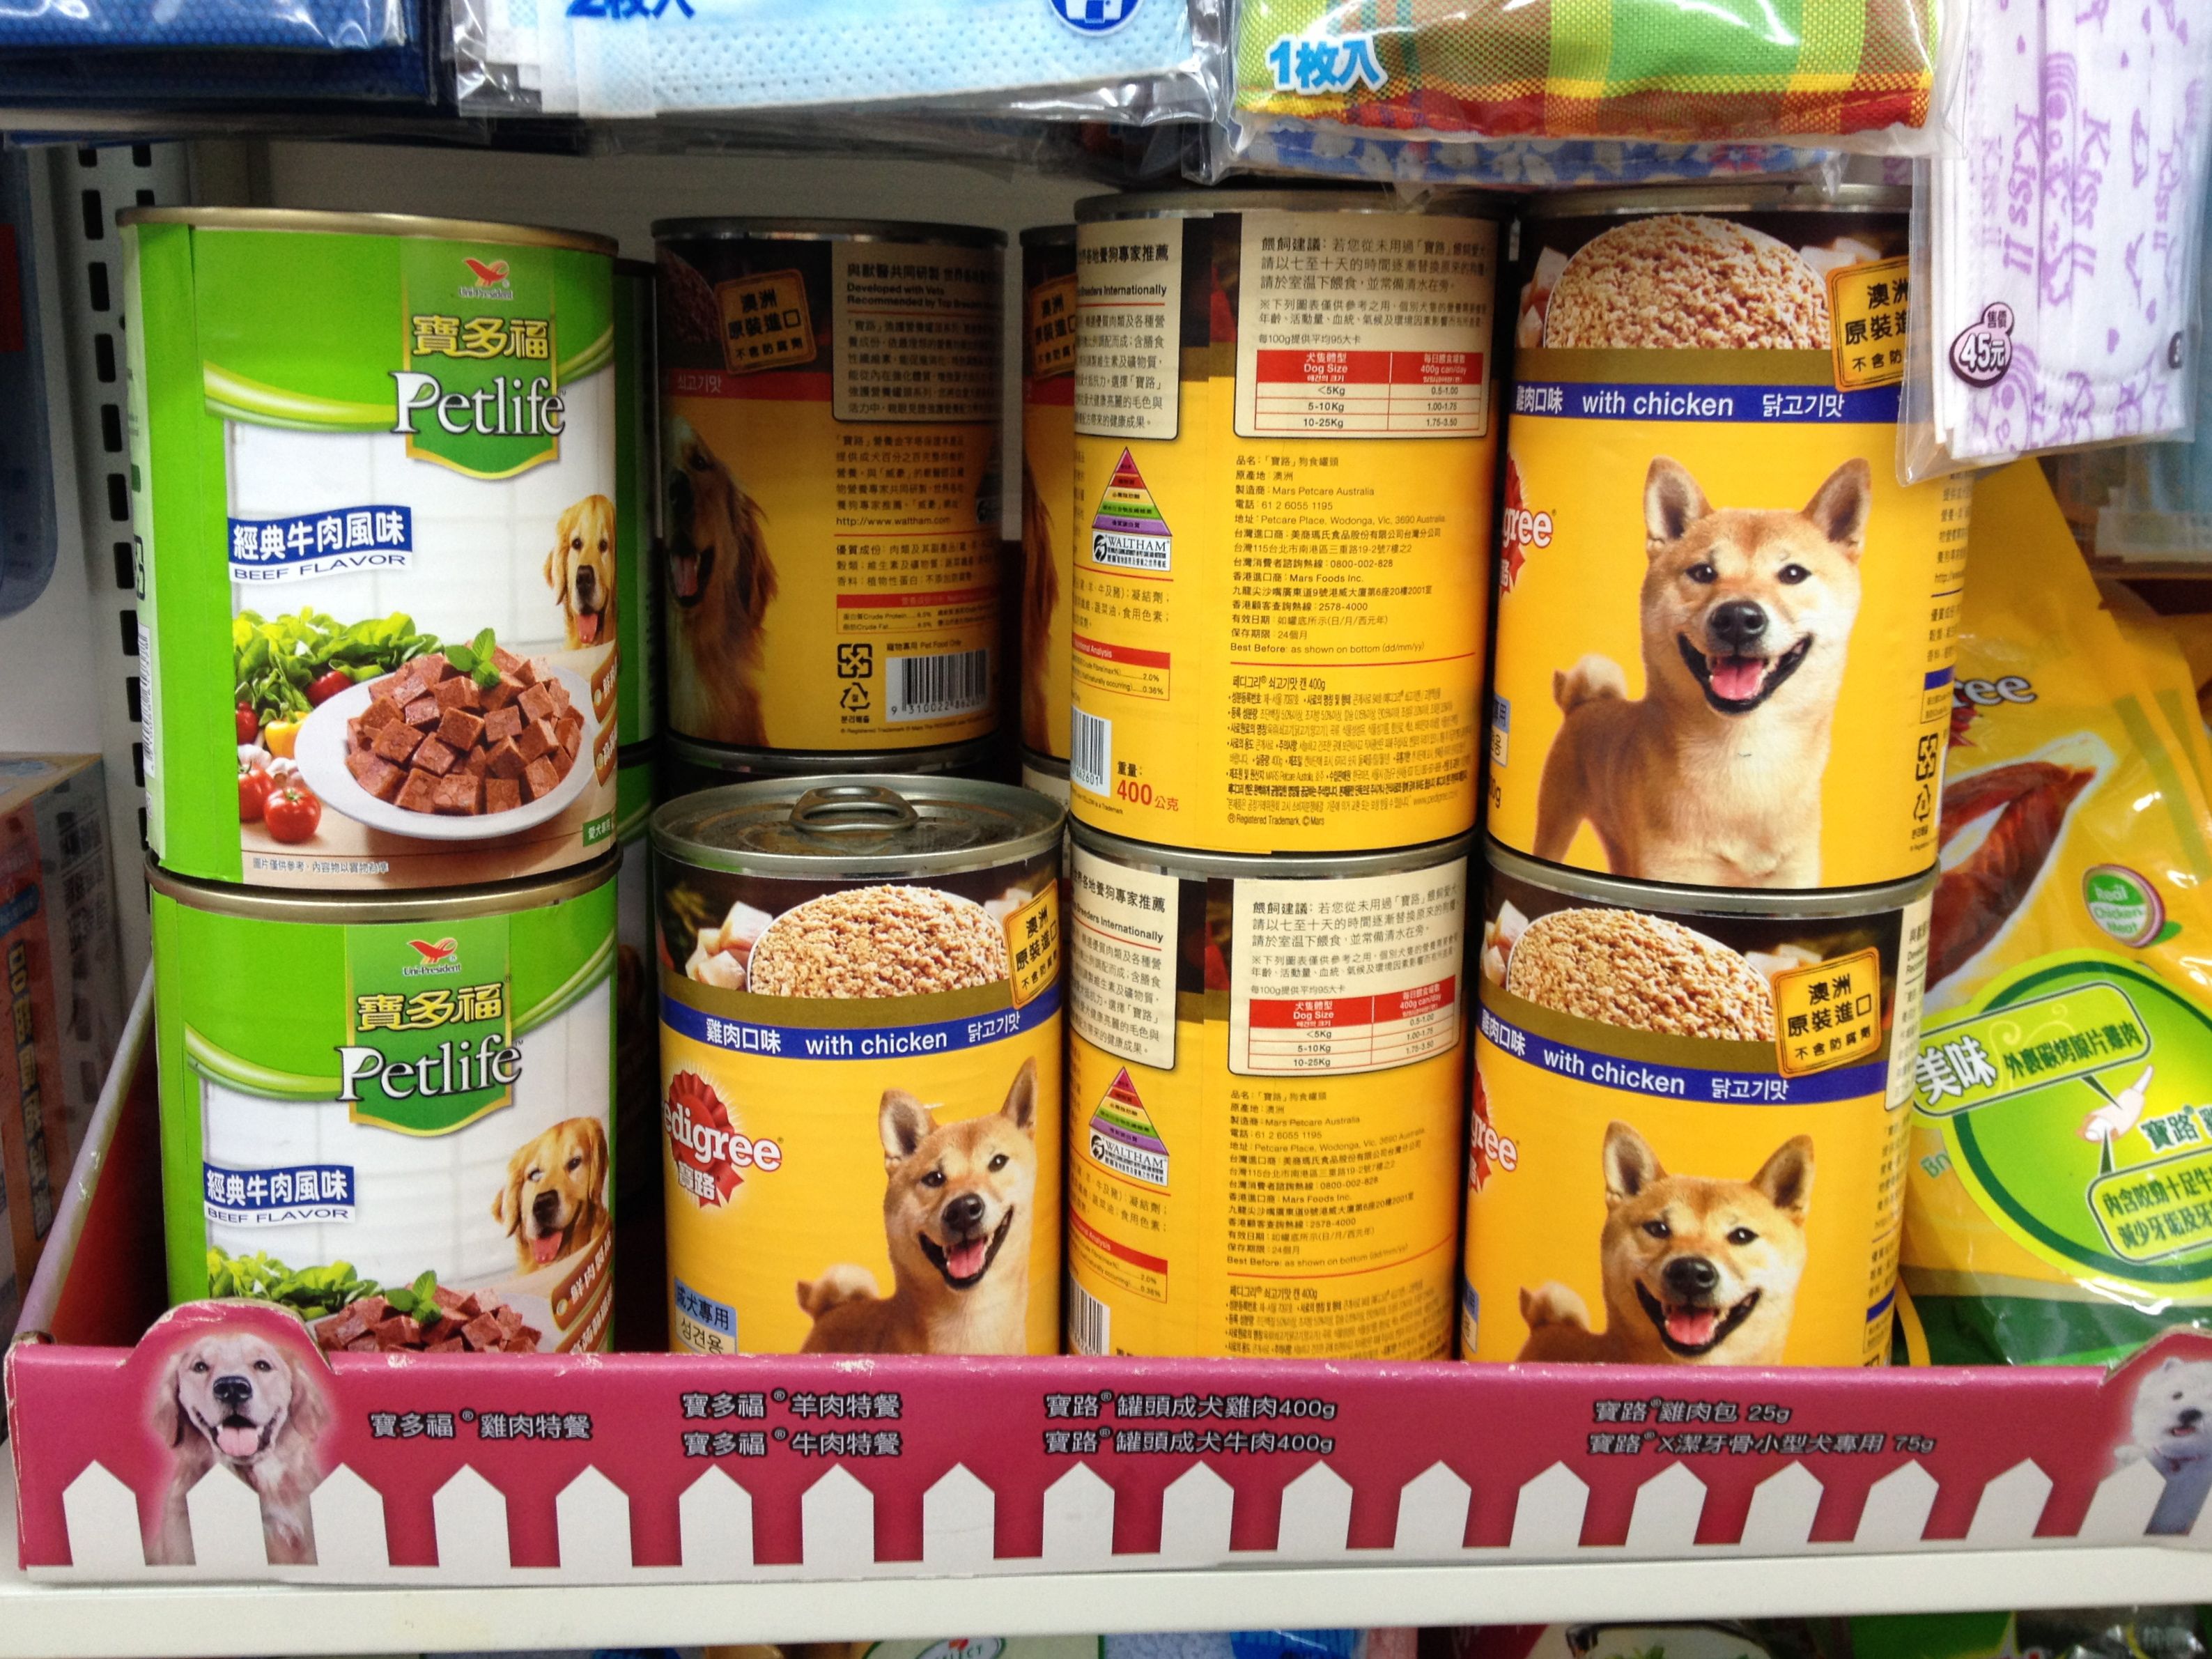 Does 7 11 Sell Dog Food?